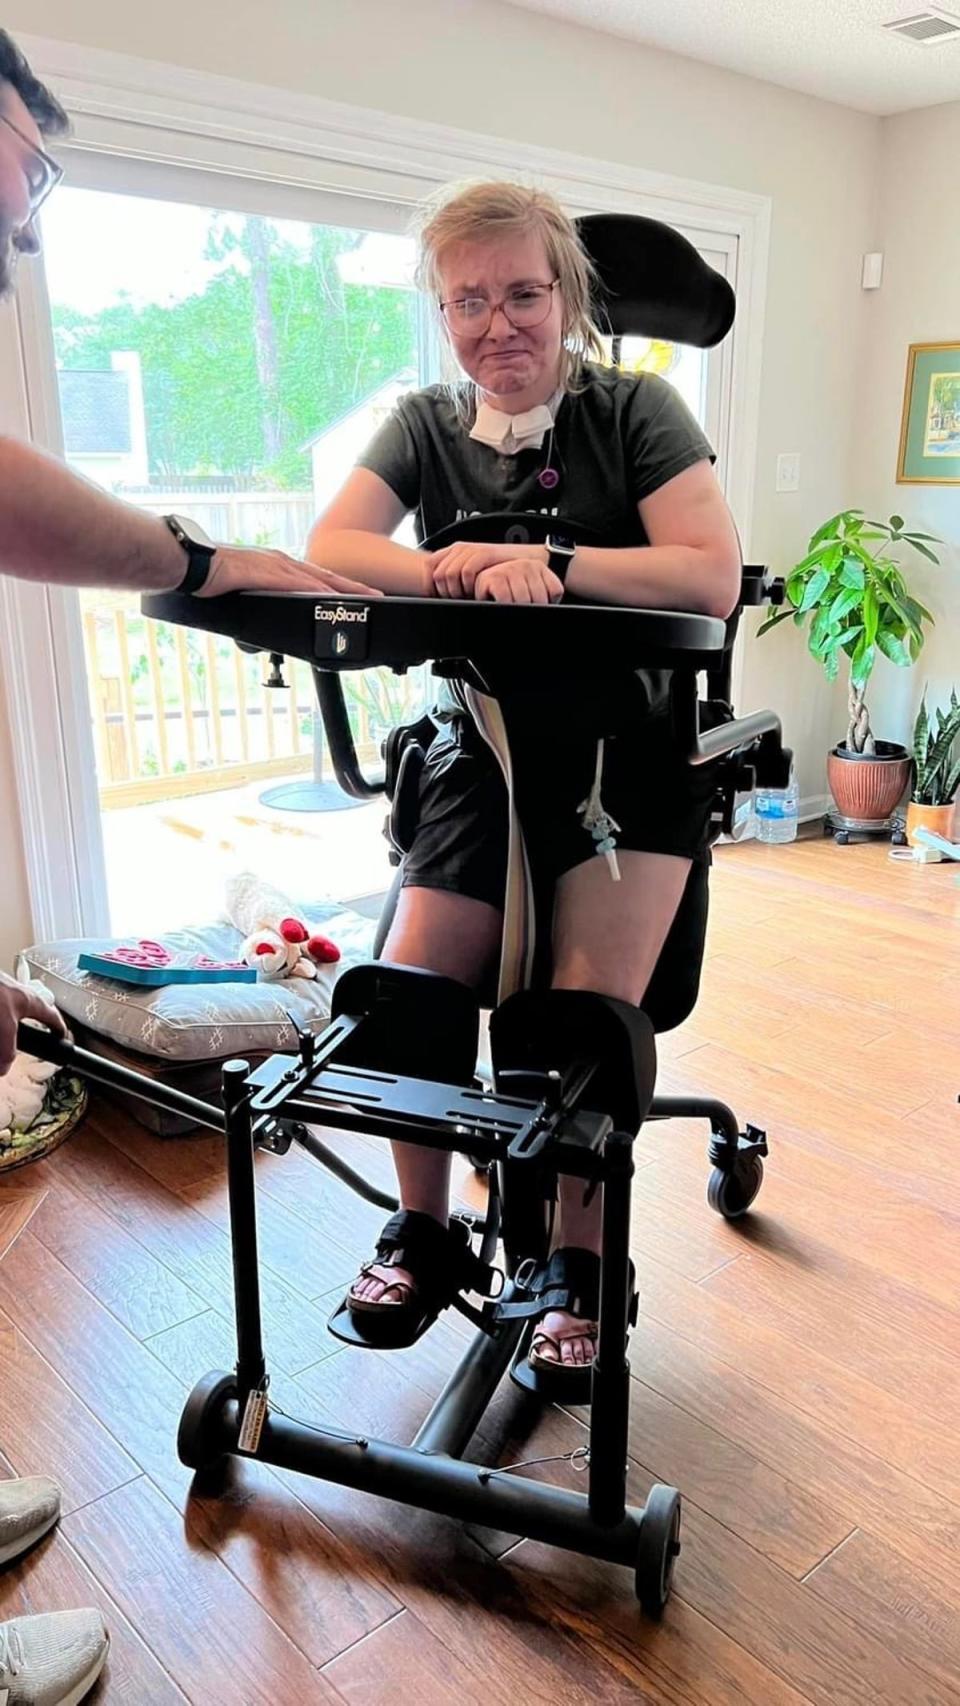 Caitlin practices at home with a loner standing frame, which is ‘tremendously helpful to her recovery’ and which her mother is attempting to get insurance to help finance (Facebook/Darlene Jensen)